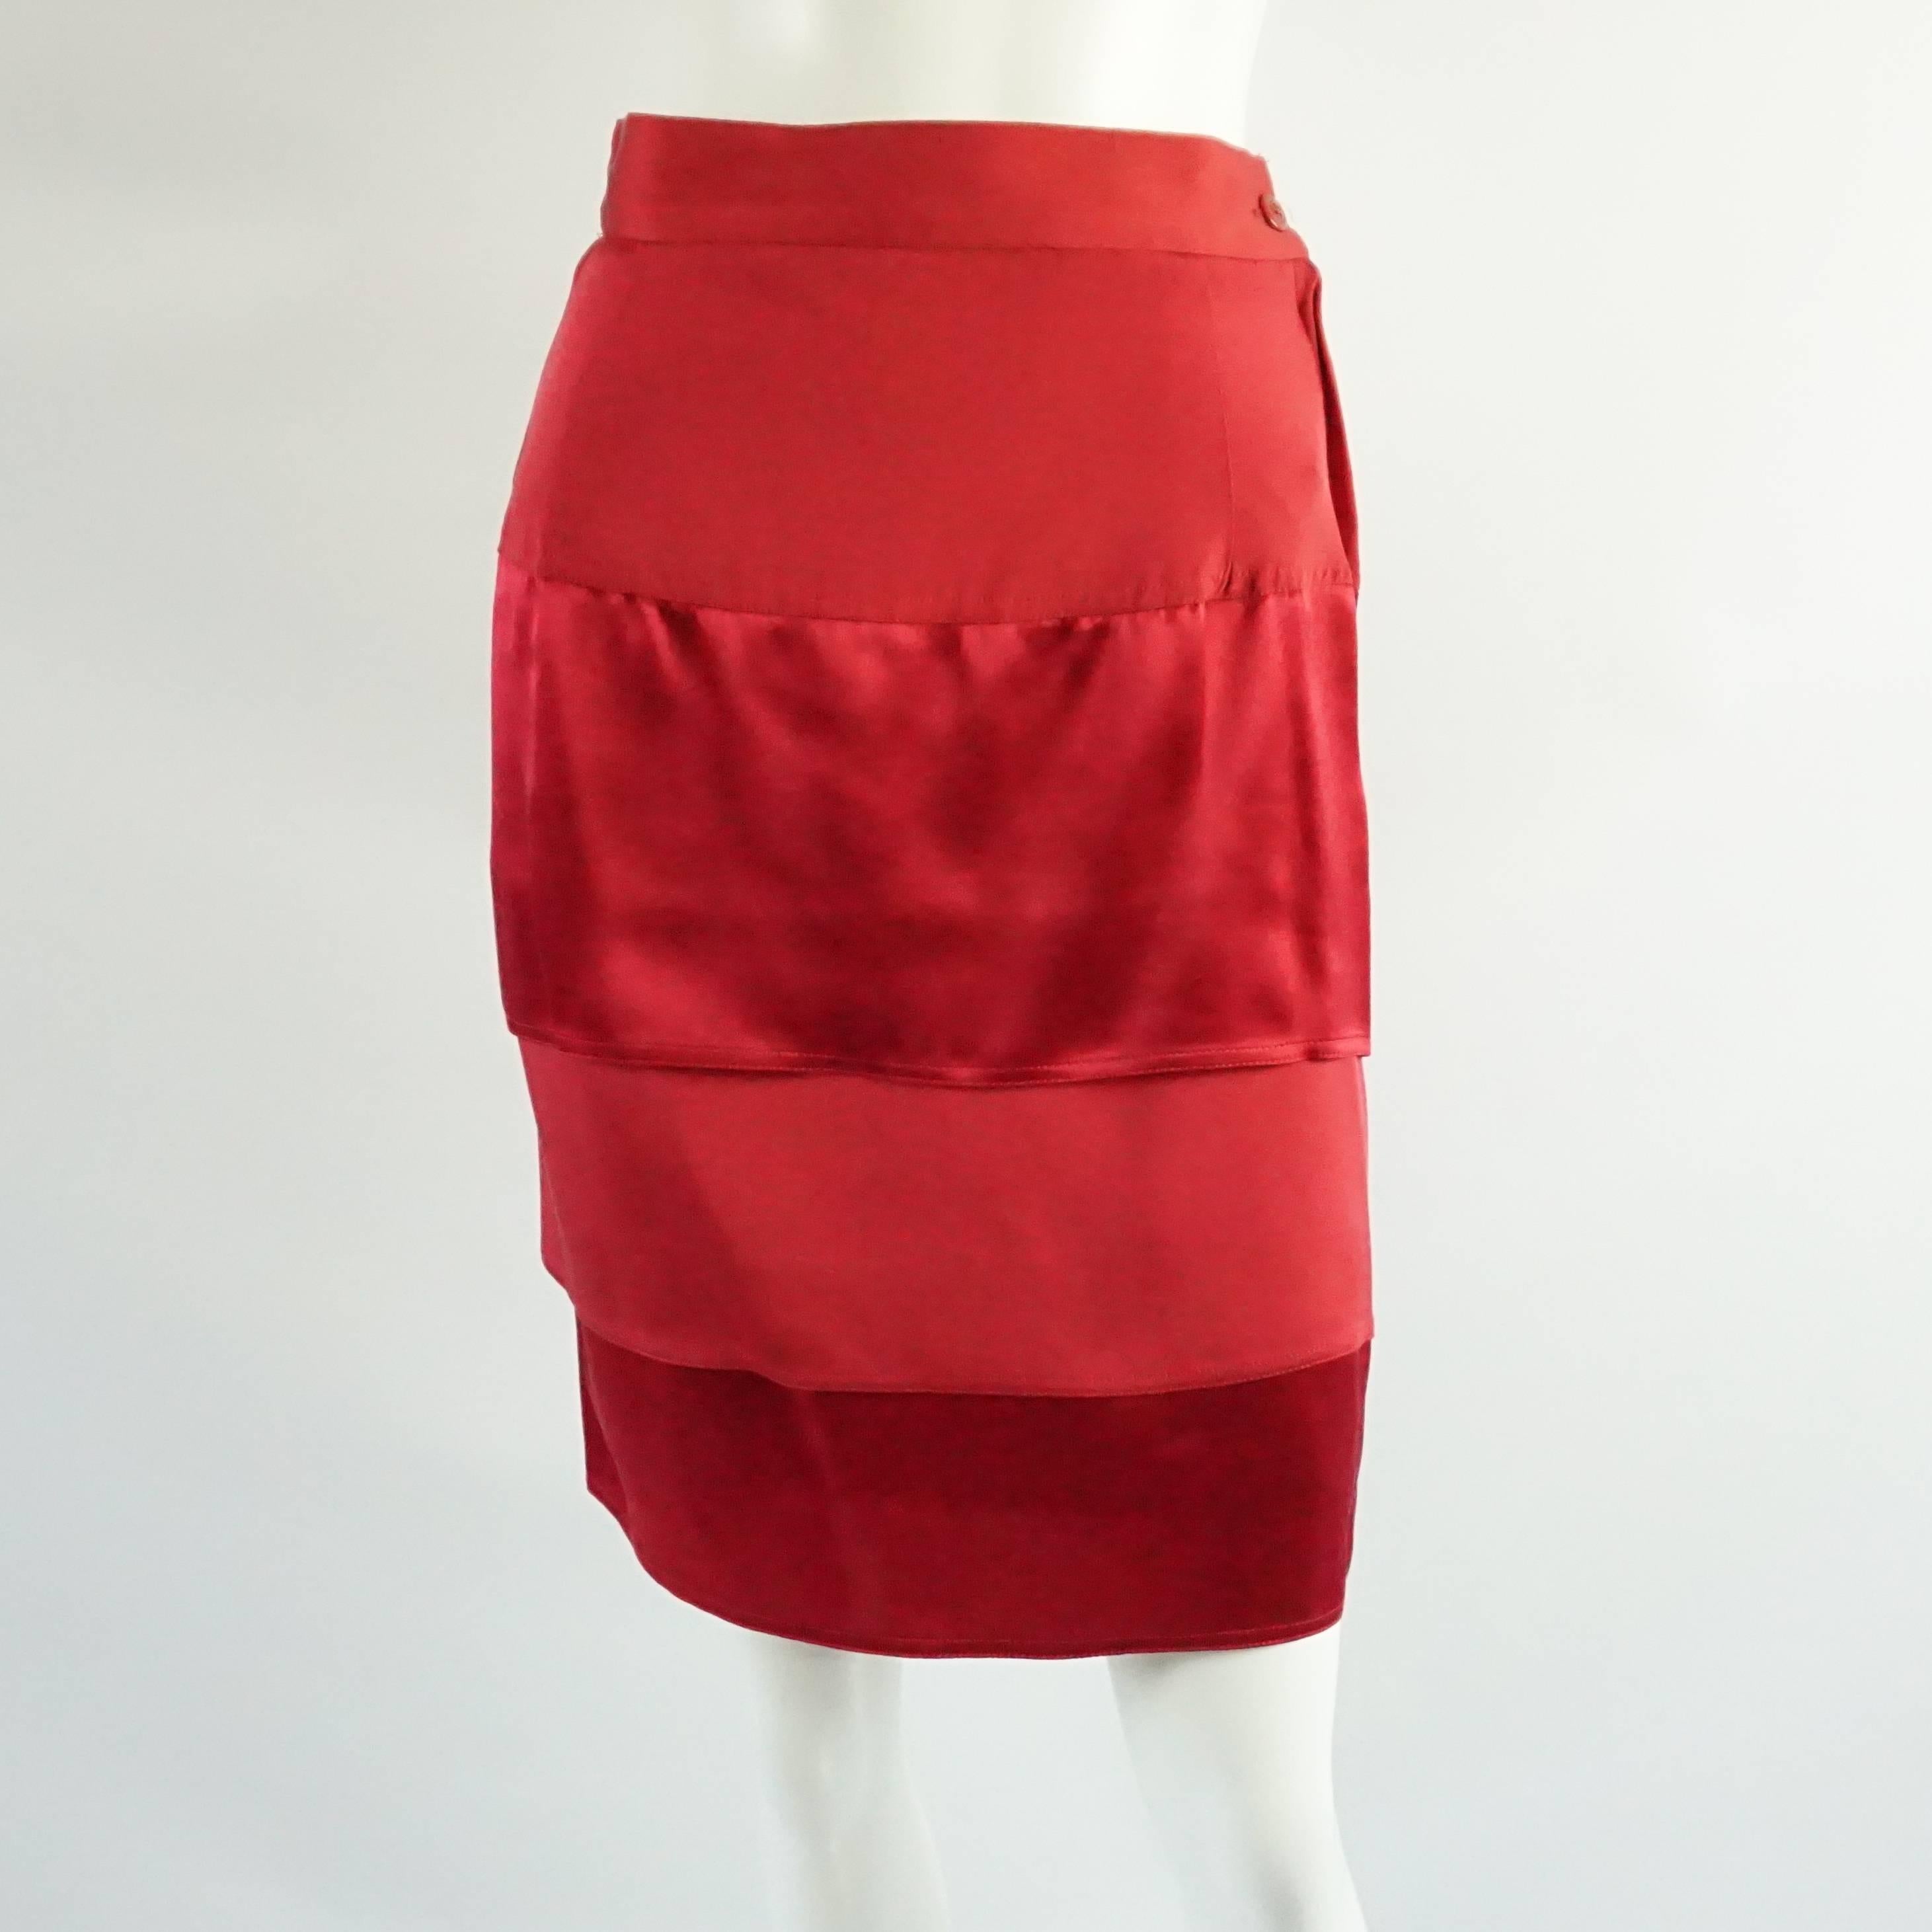 Gianni Versace 1990's Red Silk Skirt Set - 40 In Good Condition For Sale In West Palm Beach, FL